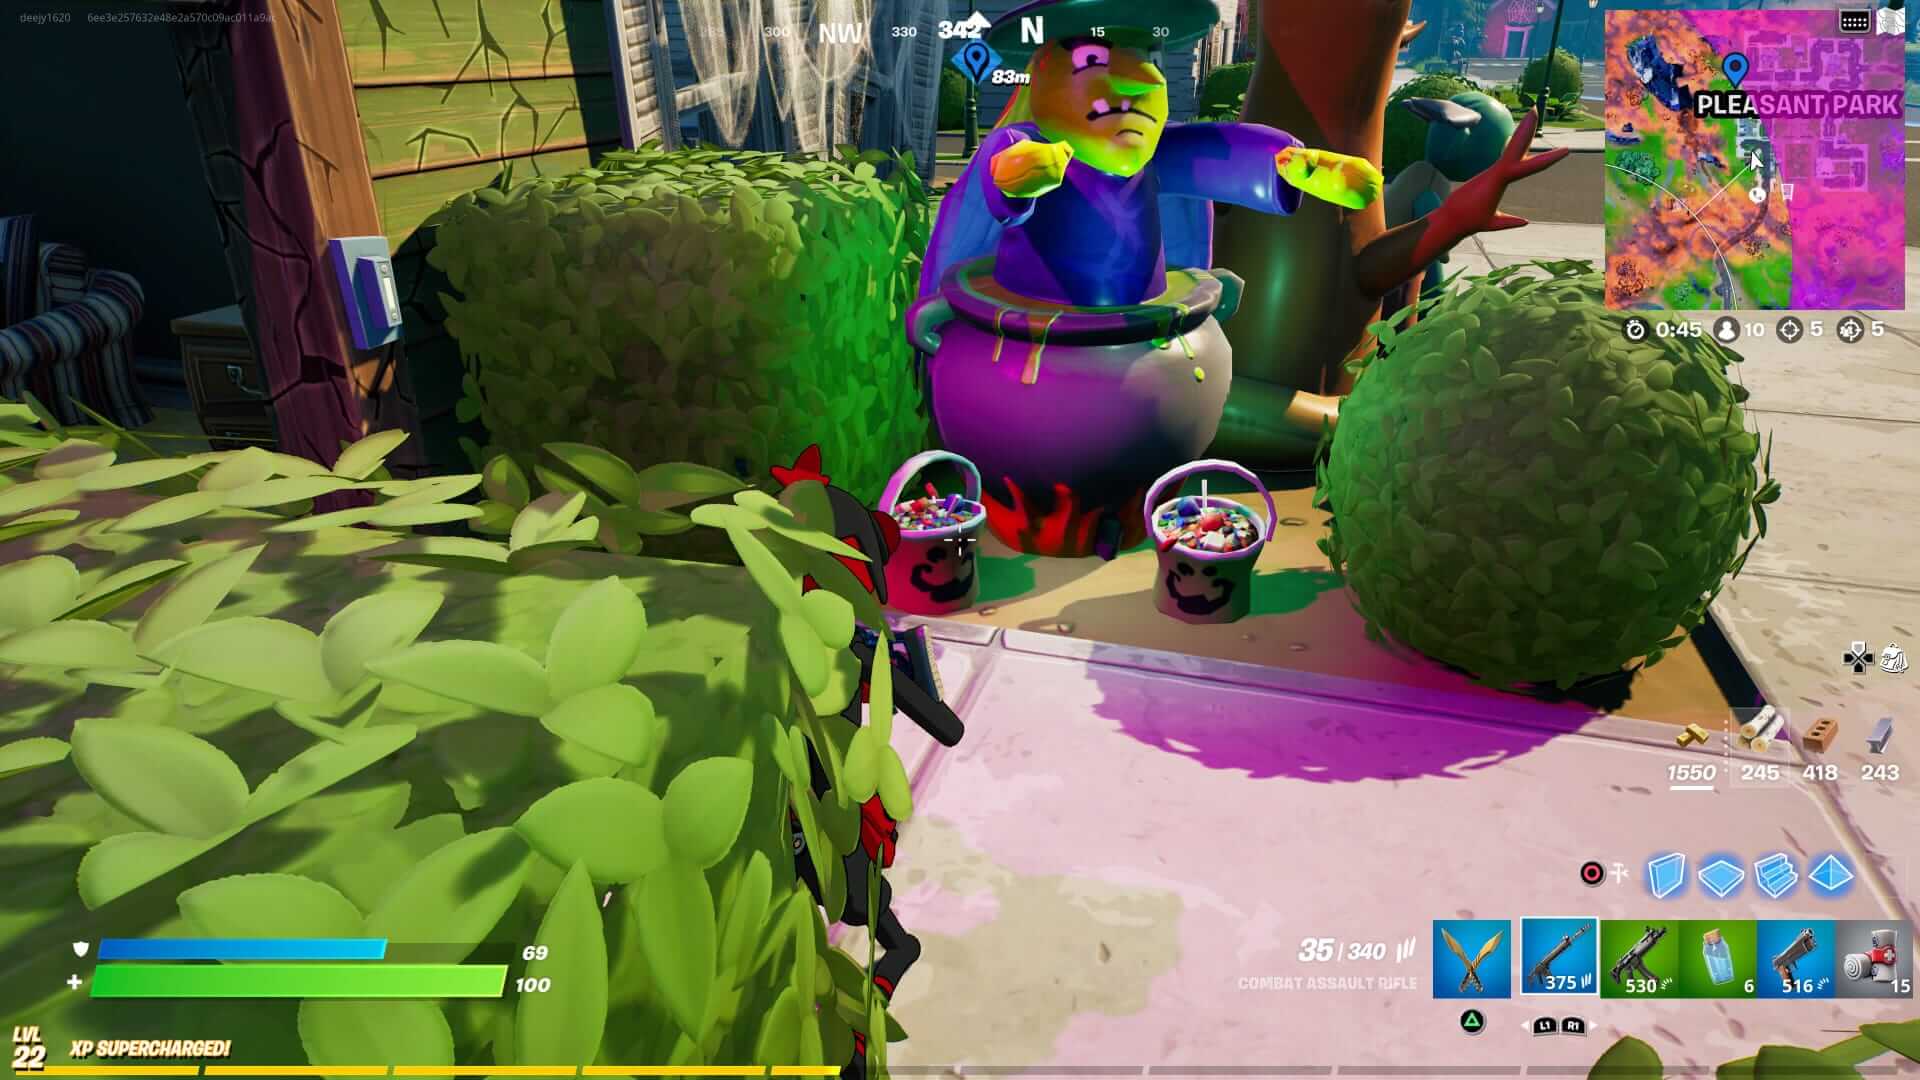 Fortnite Candy Location in Pleasant Park